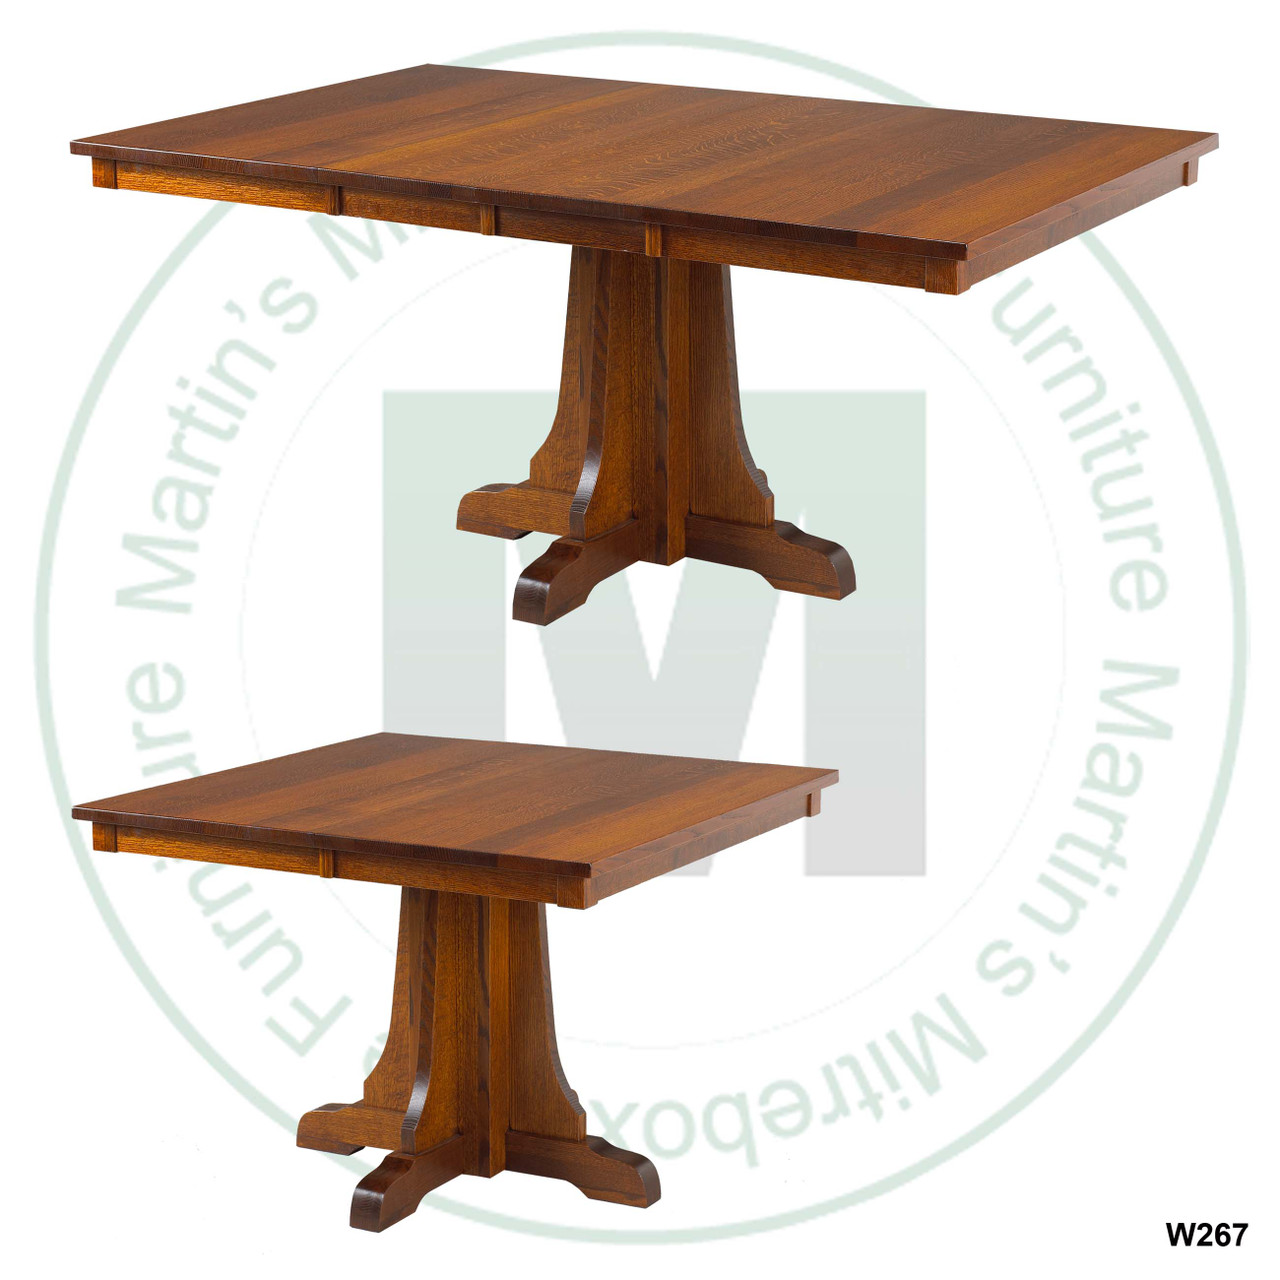 Oak Eastwood Single Pedestal Table 42''D x 48''W x 30''H With 2 - 12'' Leaves